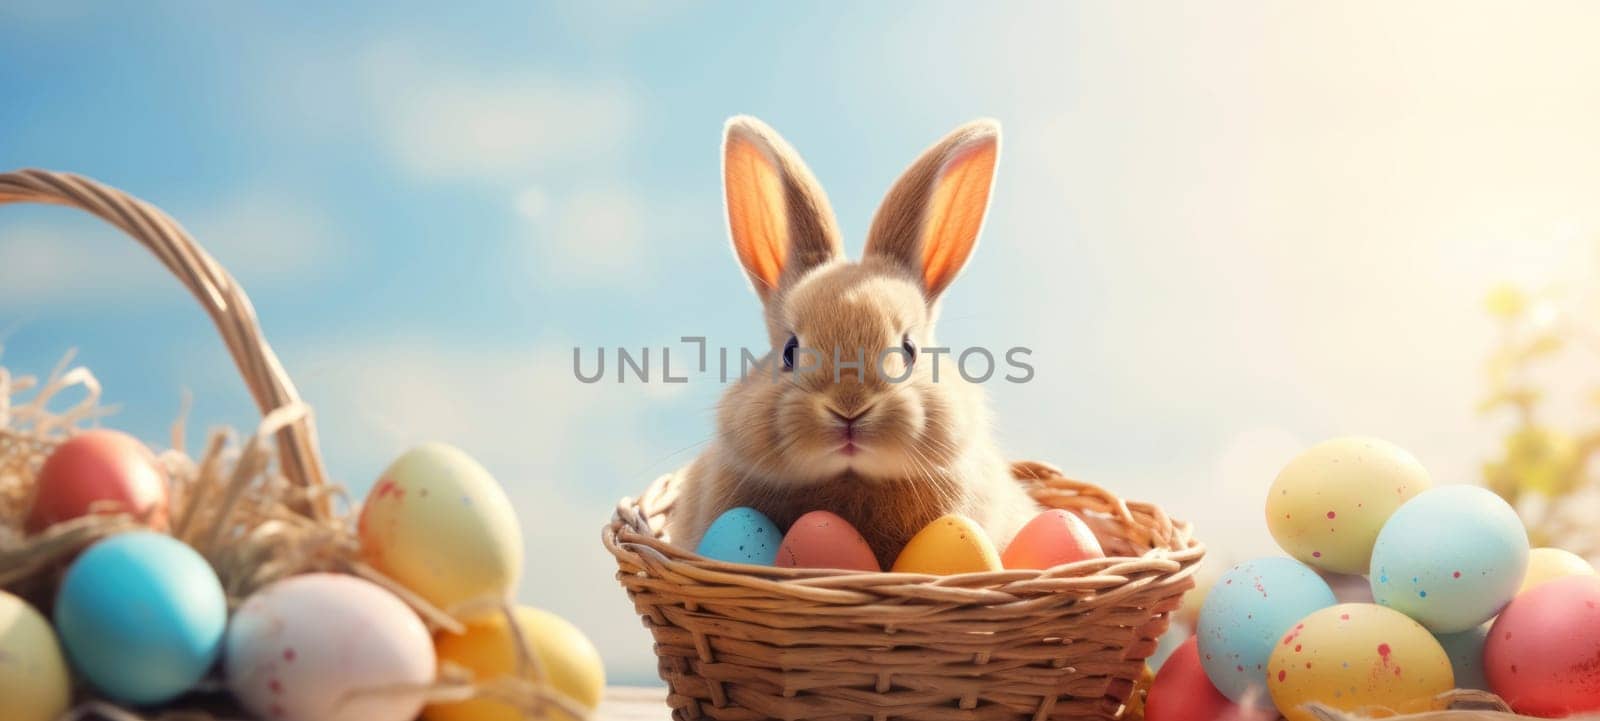 Adorable Bunny with Colorful Easter Eggs in a Wicker Basket by andreyz